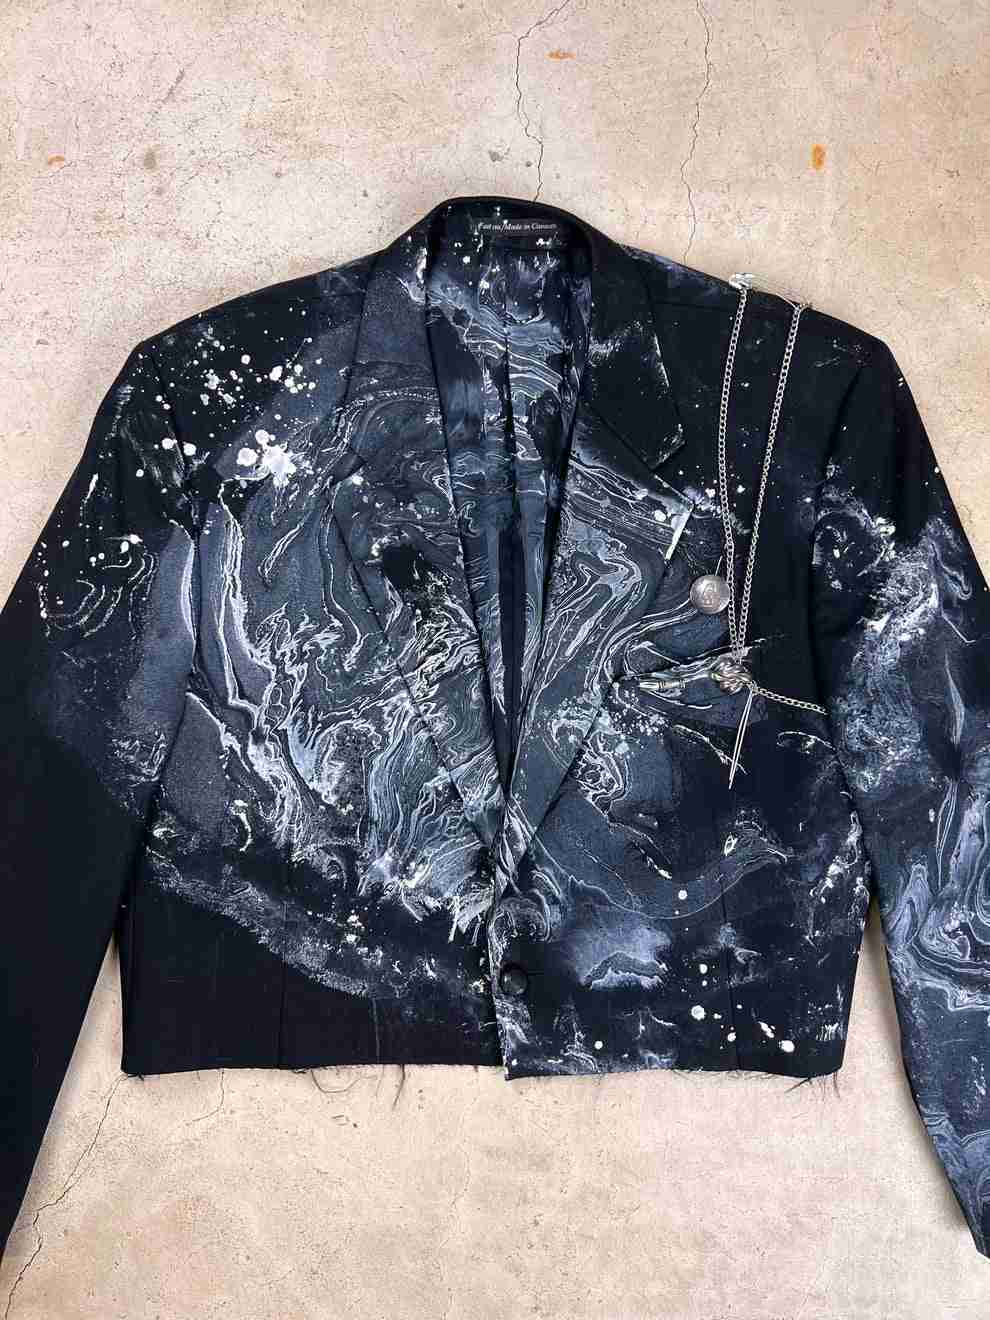 a black jacket with white paint splattered on it.